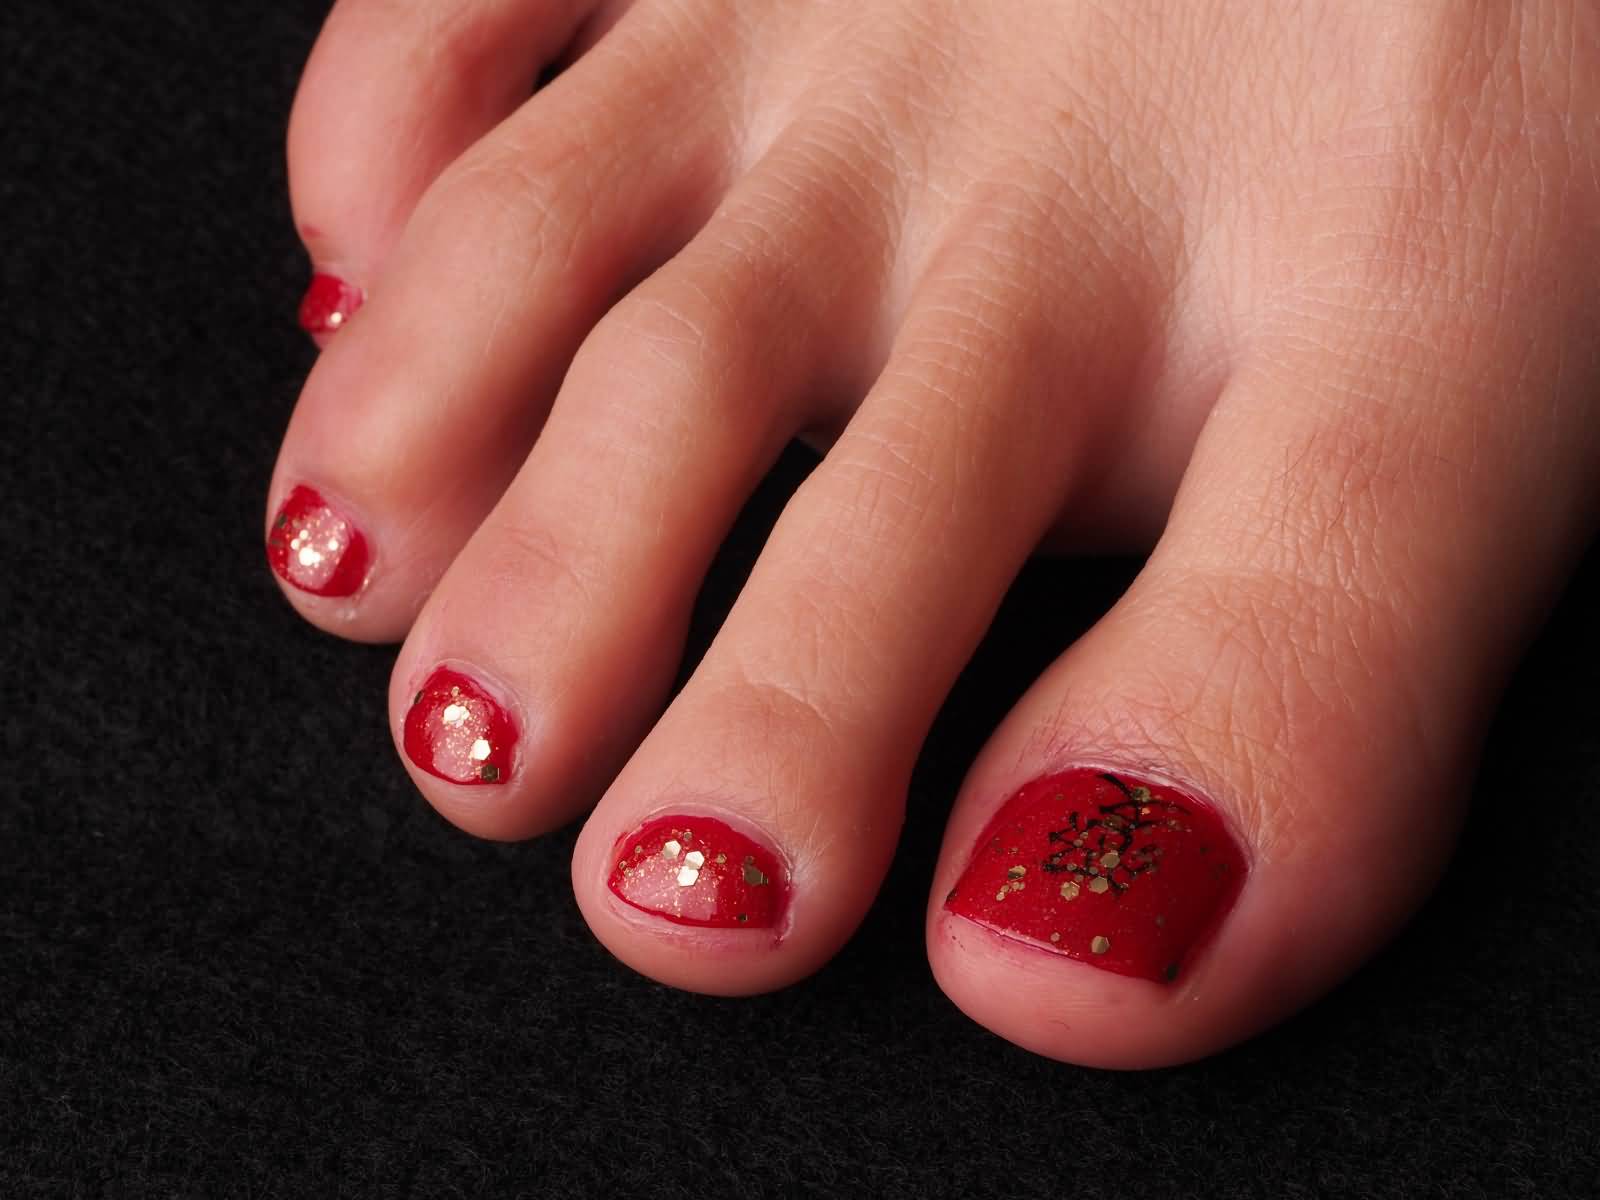 7. 58 Incredible Red Toe Nail Art Design Ideas For Trendy Girls.